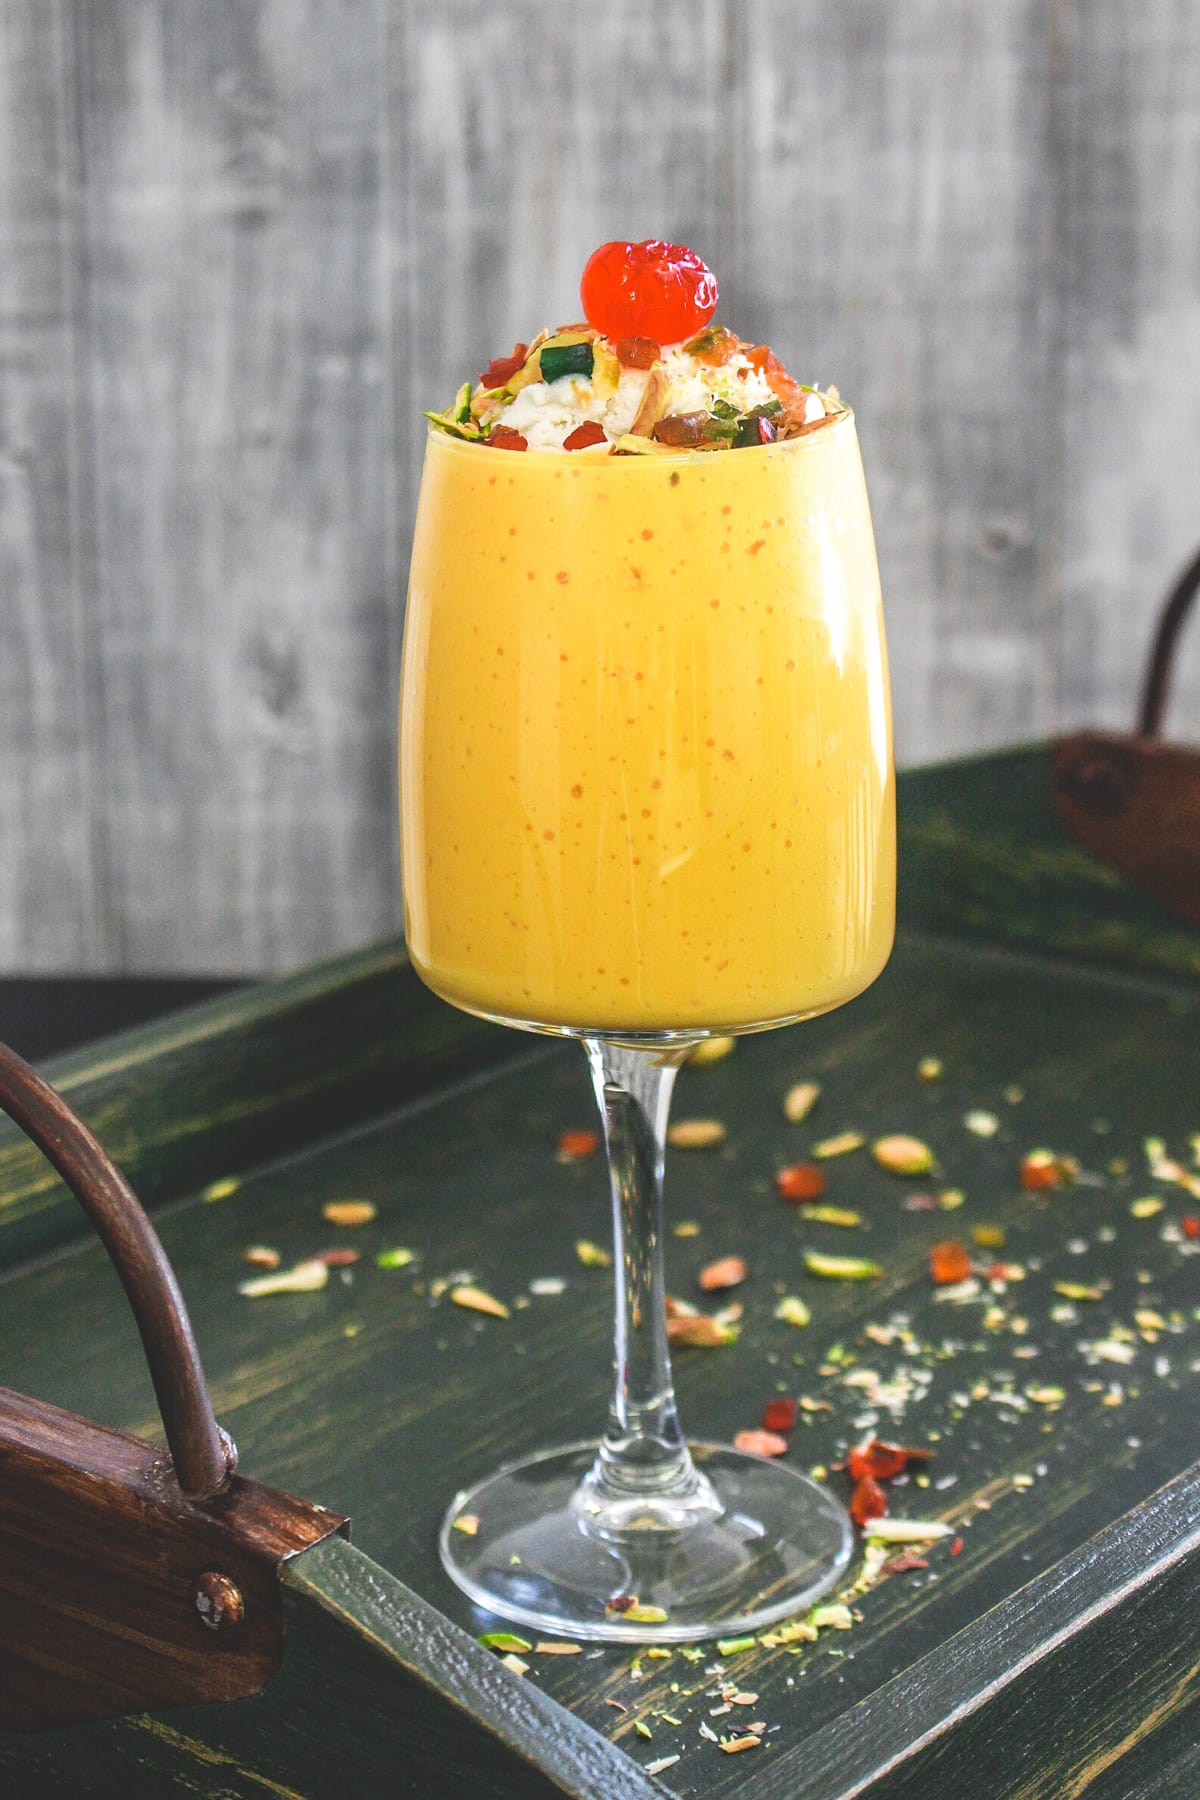 Glass of mango mastani in a tray with nuts spread around.